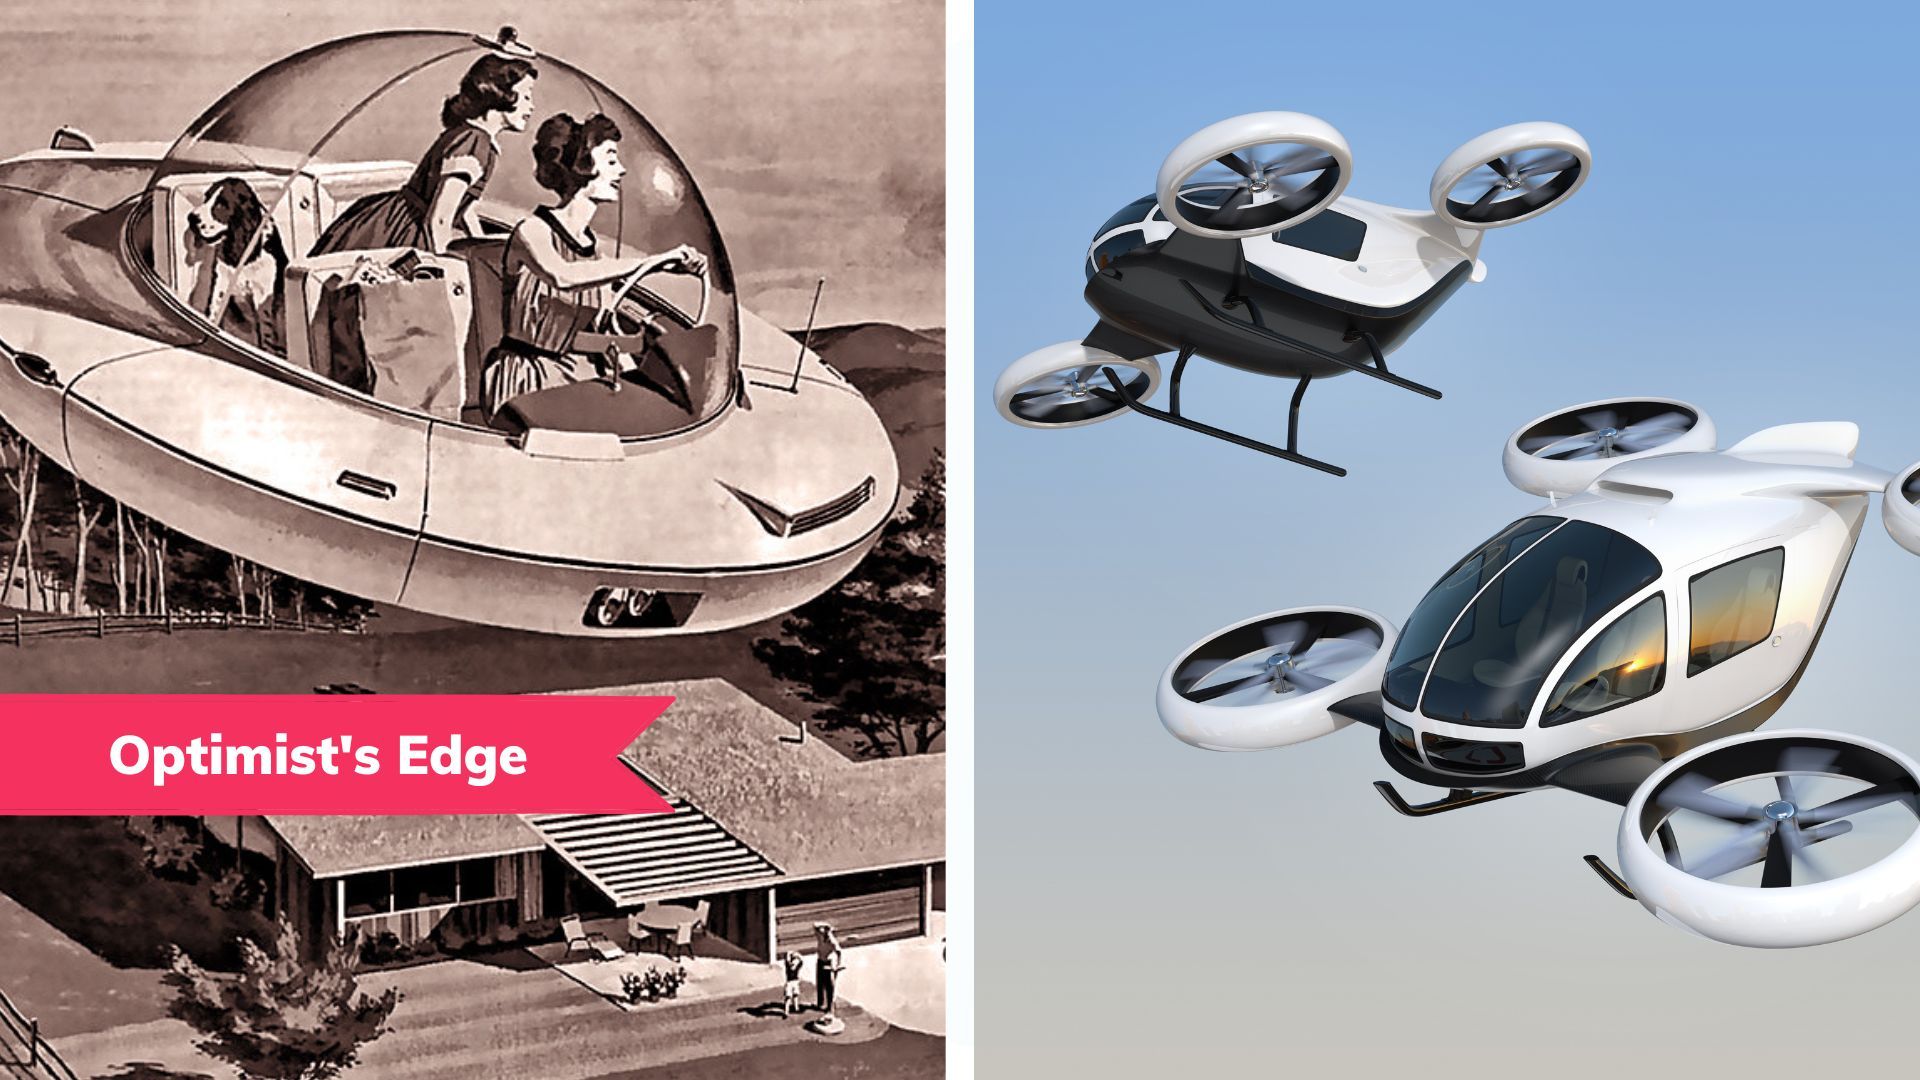 💡 Optimist's Edge: Flying cars from science fiction to science fact